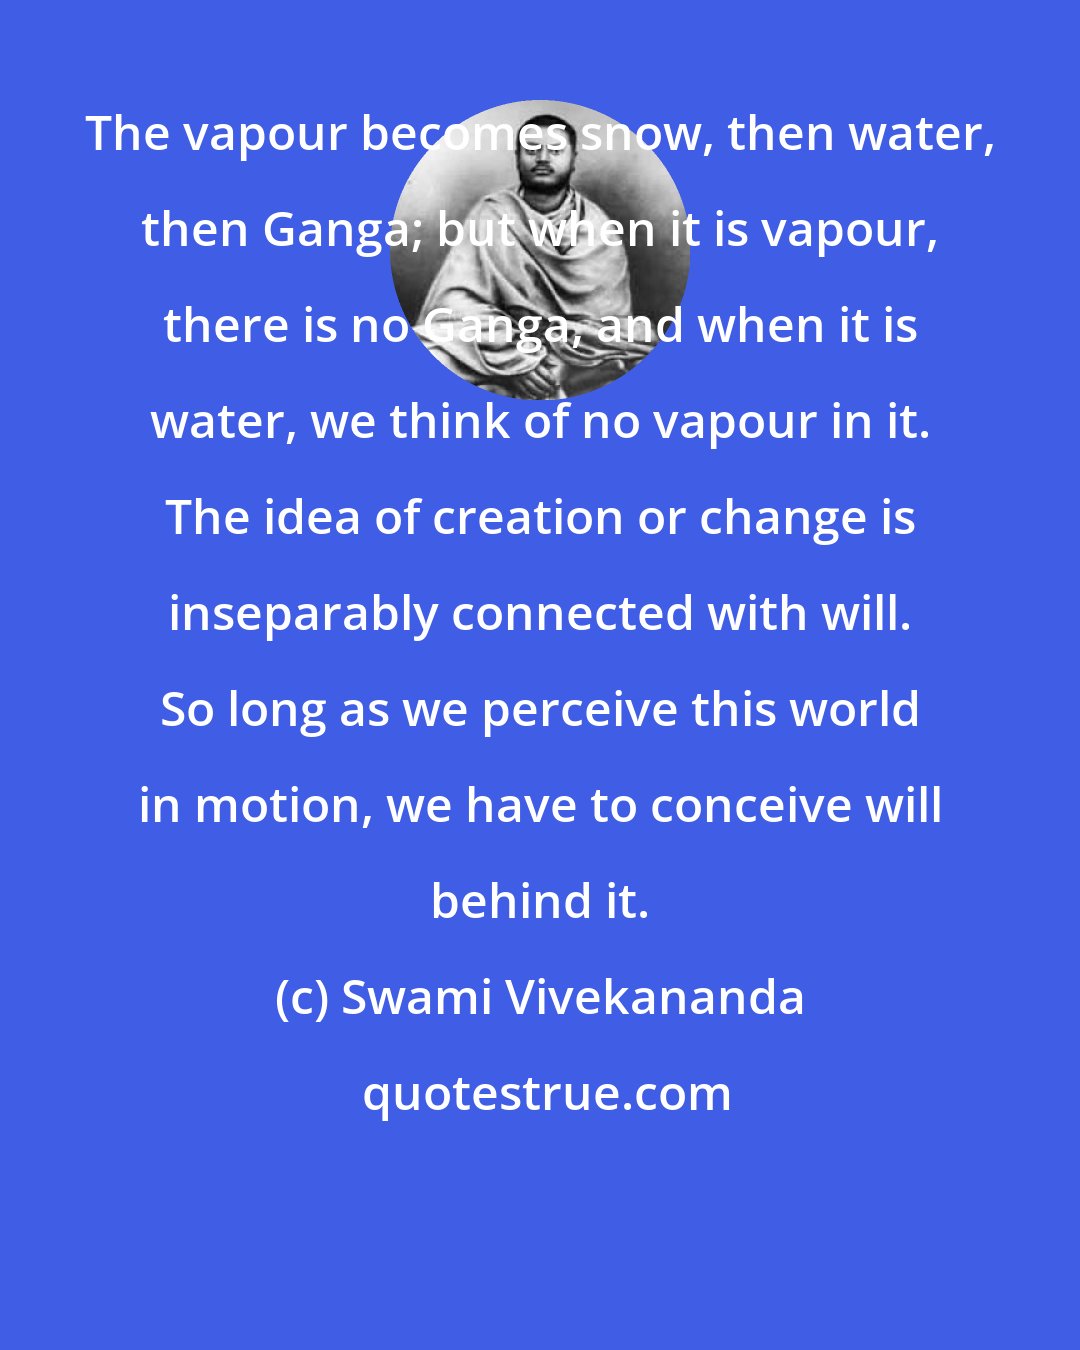 Swami Vivekananda: The vapour becomes snow, then water, then Ganga; but when it is vapour, there is no Ganga, and when it is water, we think of no vapour in it. The idea of creation or change is inseparably connected with will. So long as we perceive this world in motion, we have to conceive will behind it.